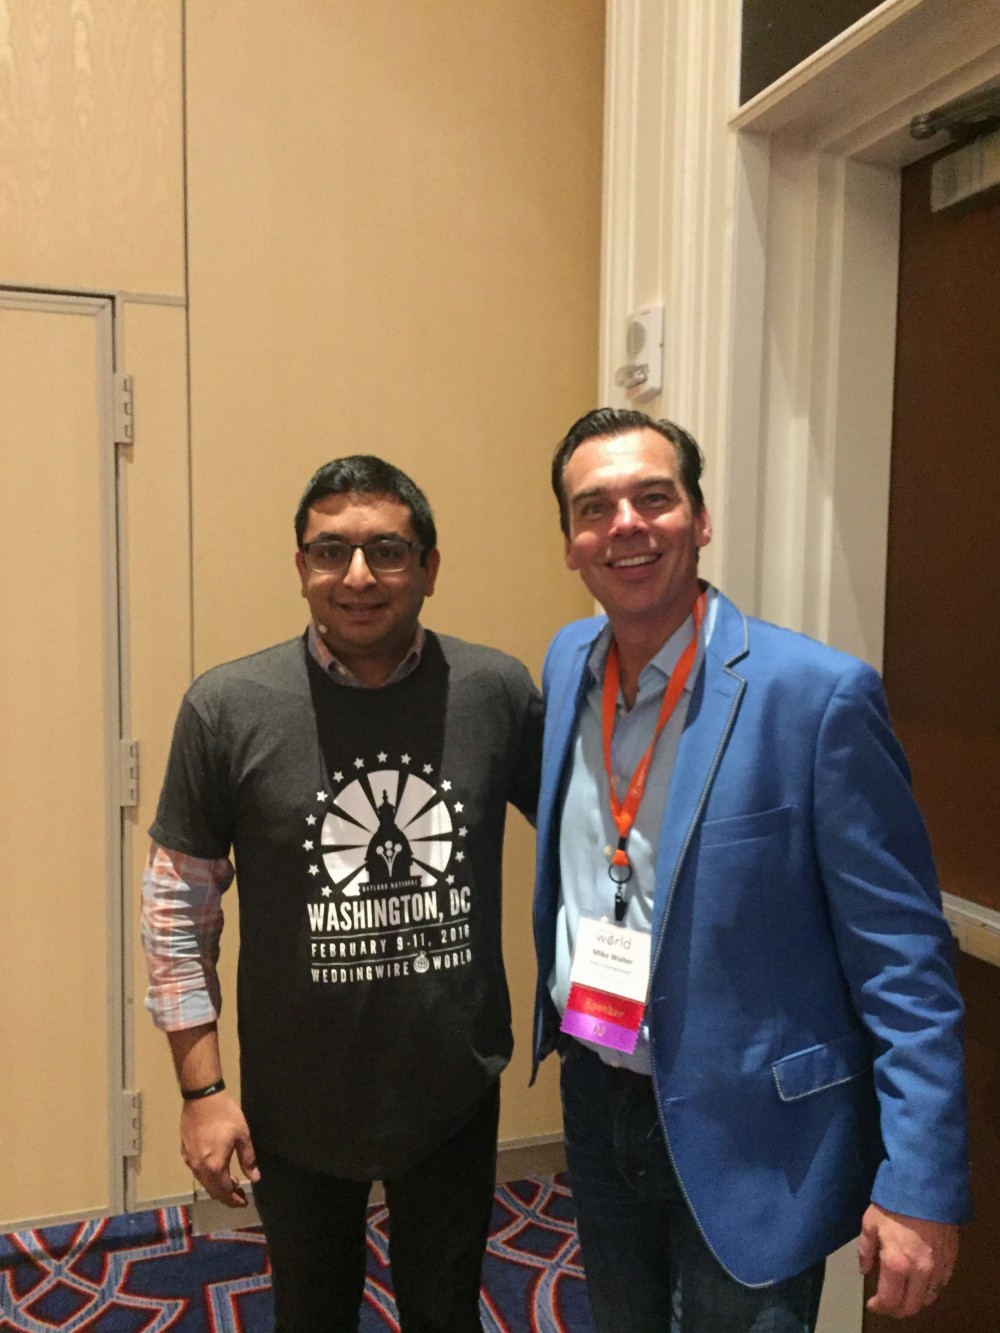 Mike Walter with WeddingWire CMO Sonny Ganguly